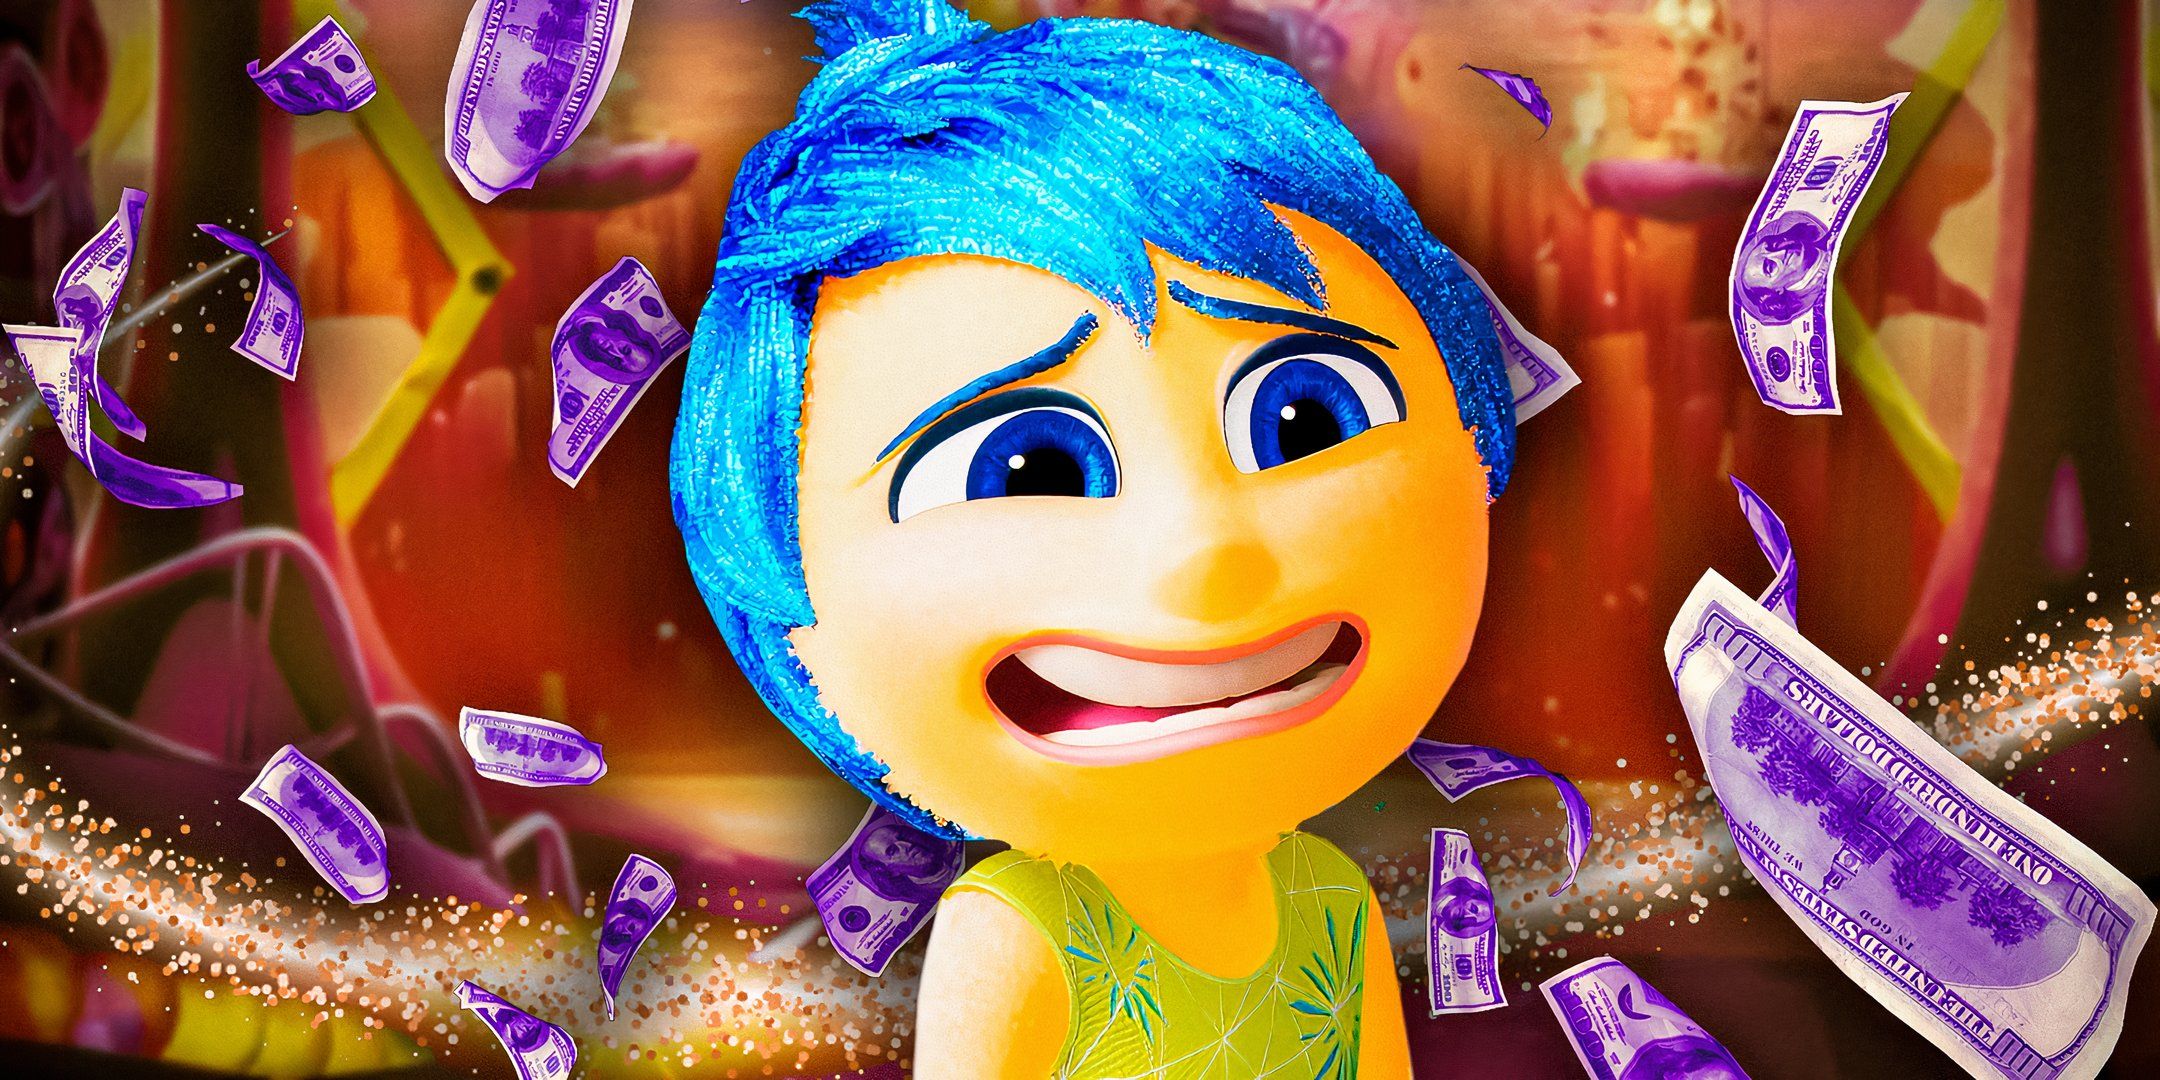 Joy in Inside Out 2 surrounded by money.